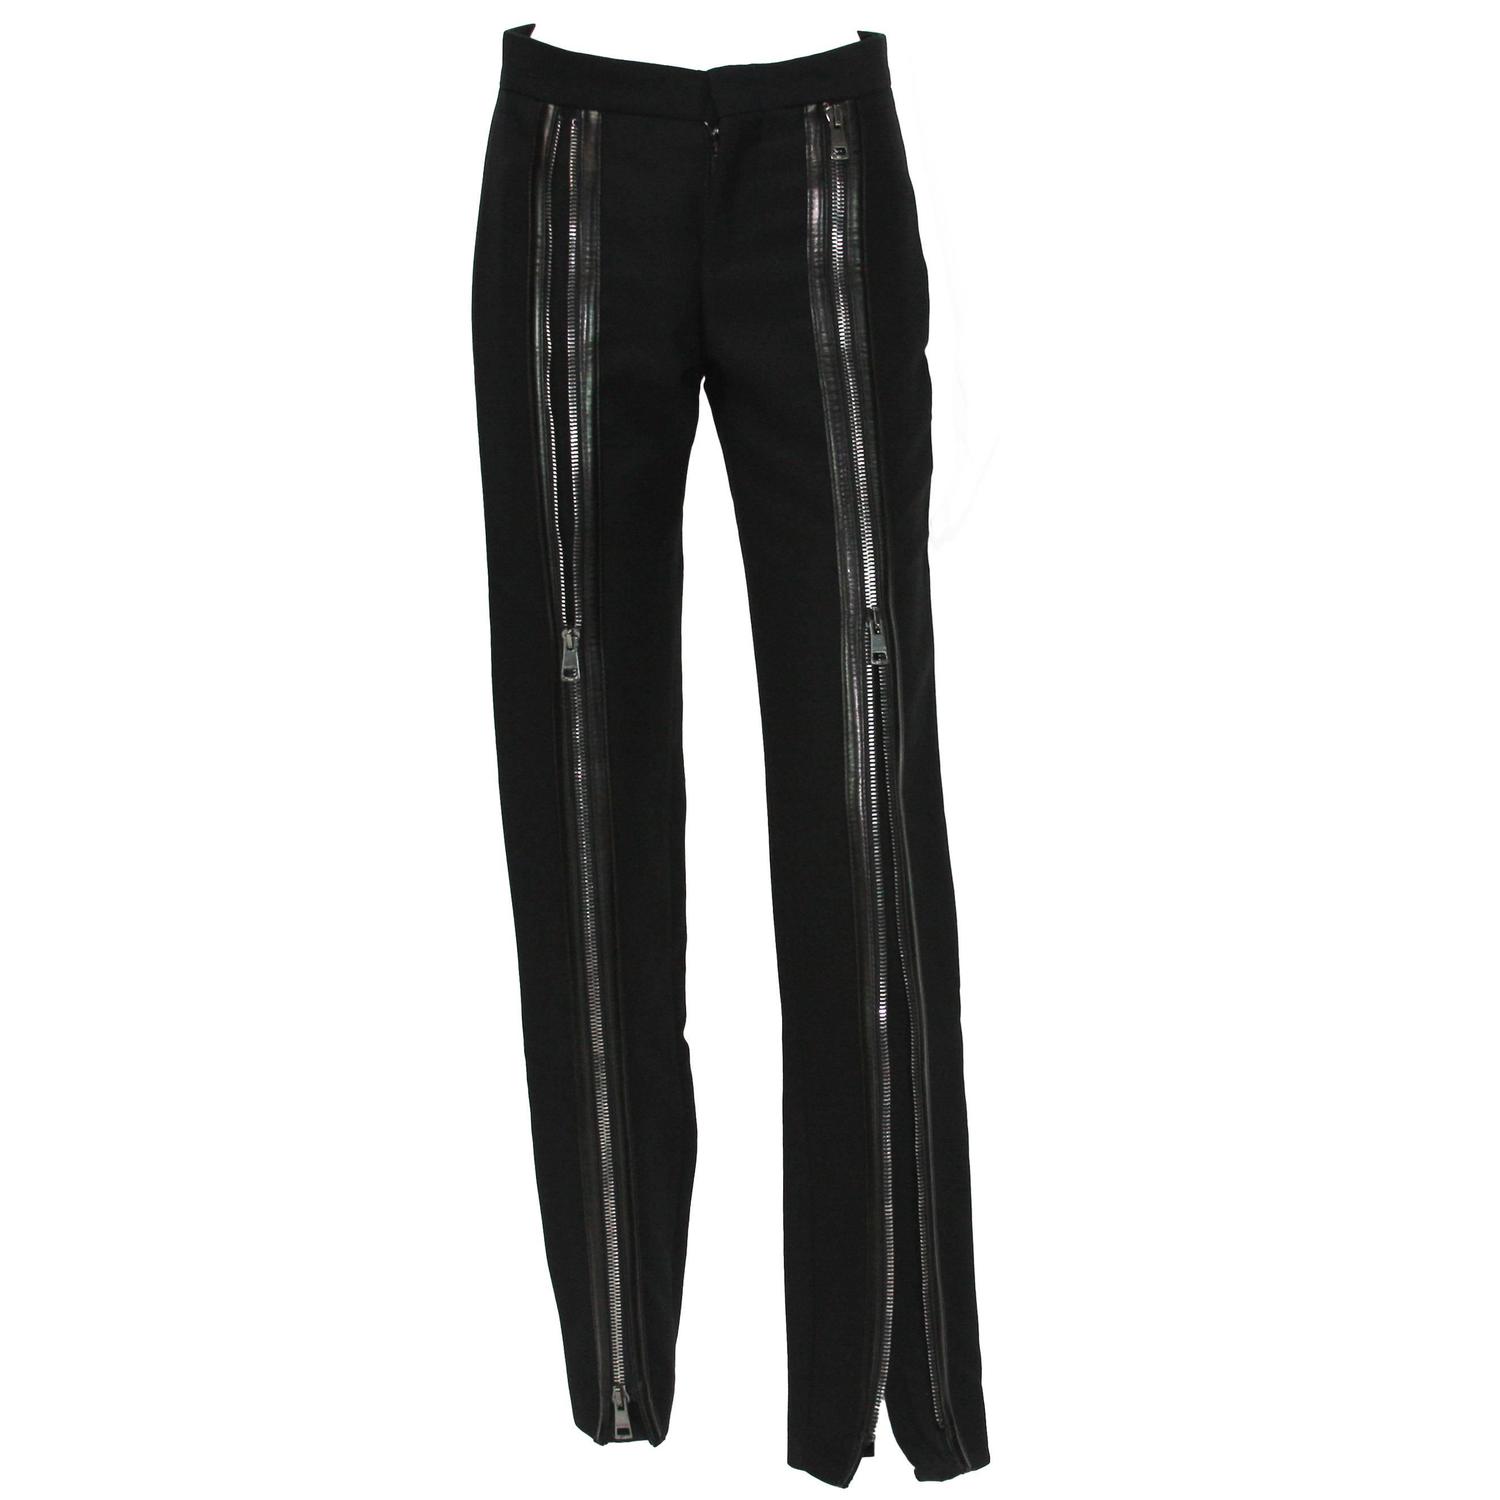 Tom Ford for Gucci F/W 2001 Zipper Leather Pants at 1stdibs